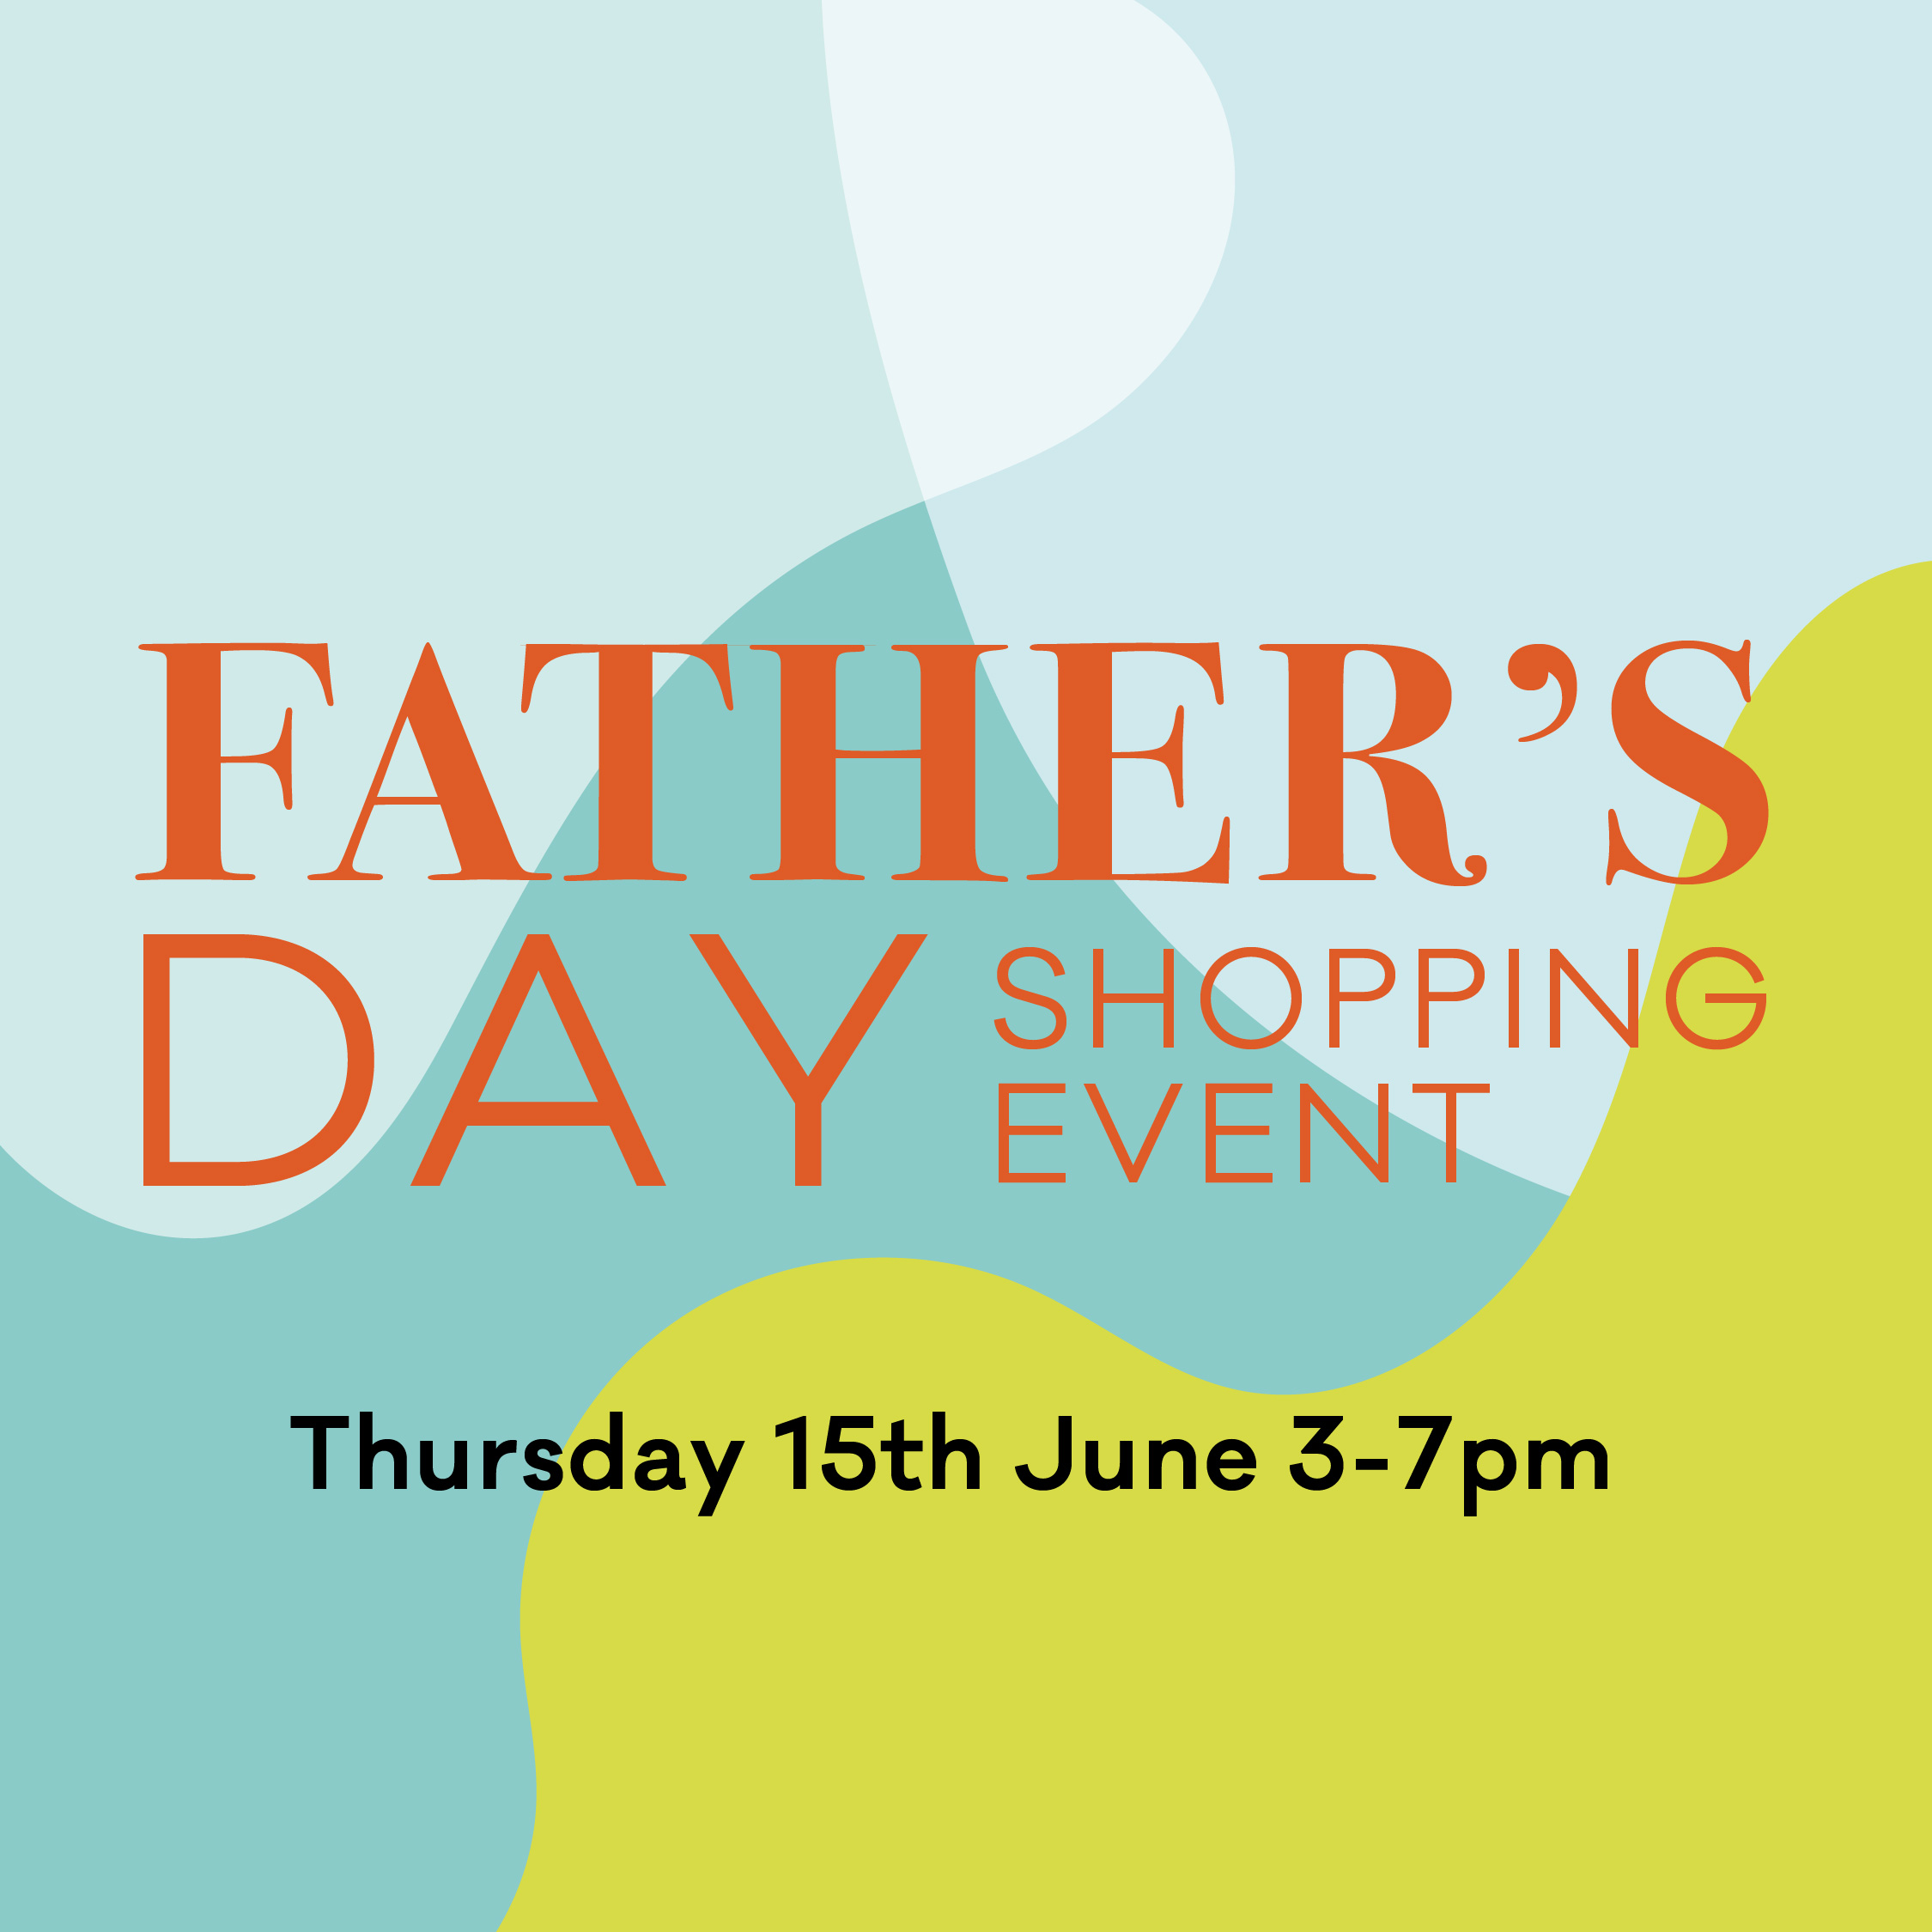 Exclusive Father's Day Shopping Event